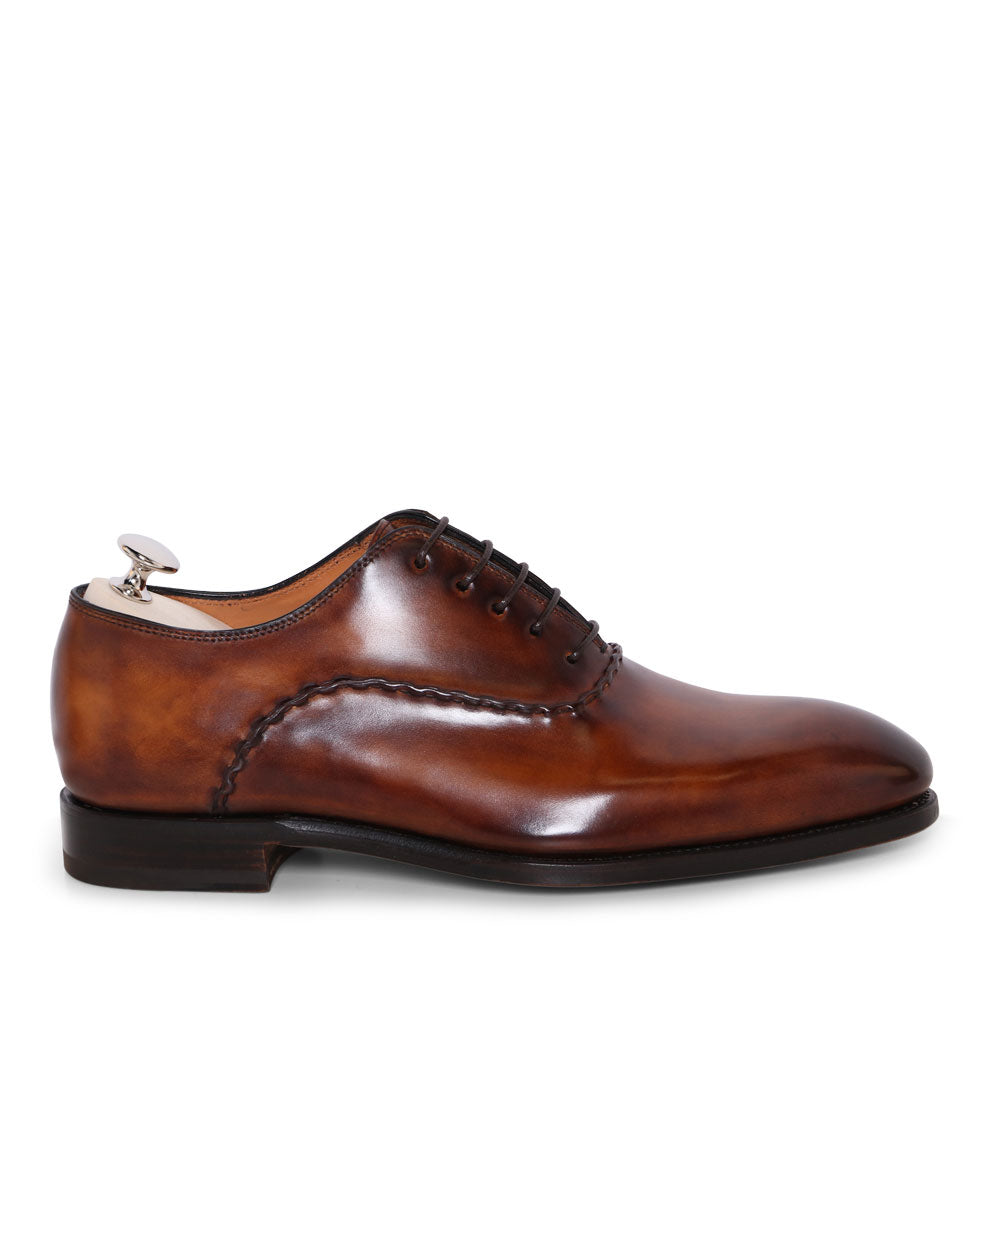 Giallo Antico Goodyear Canova with Leather Sole